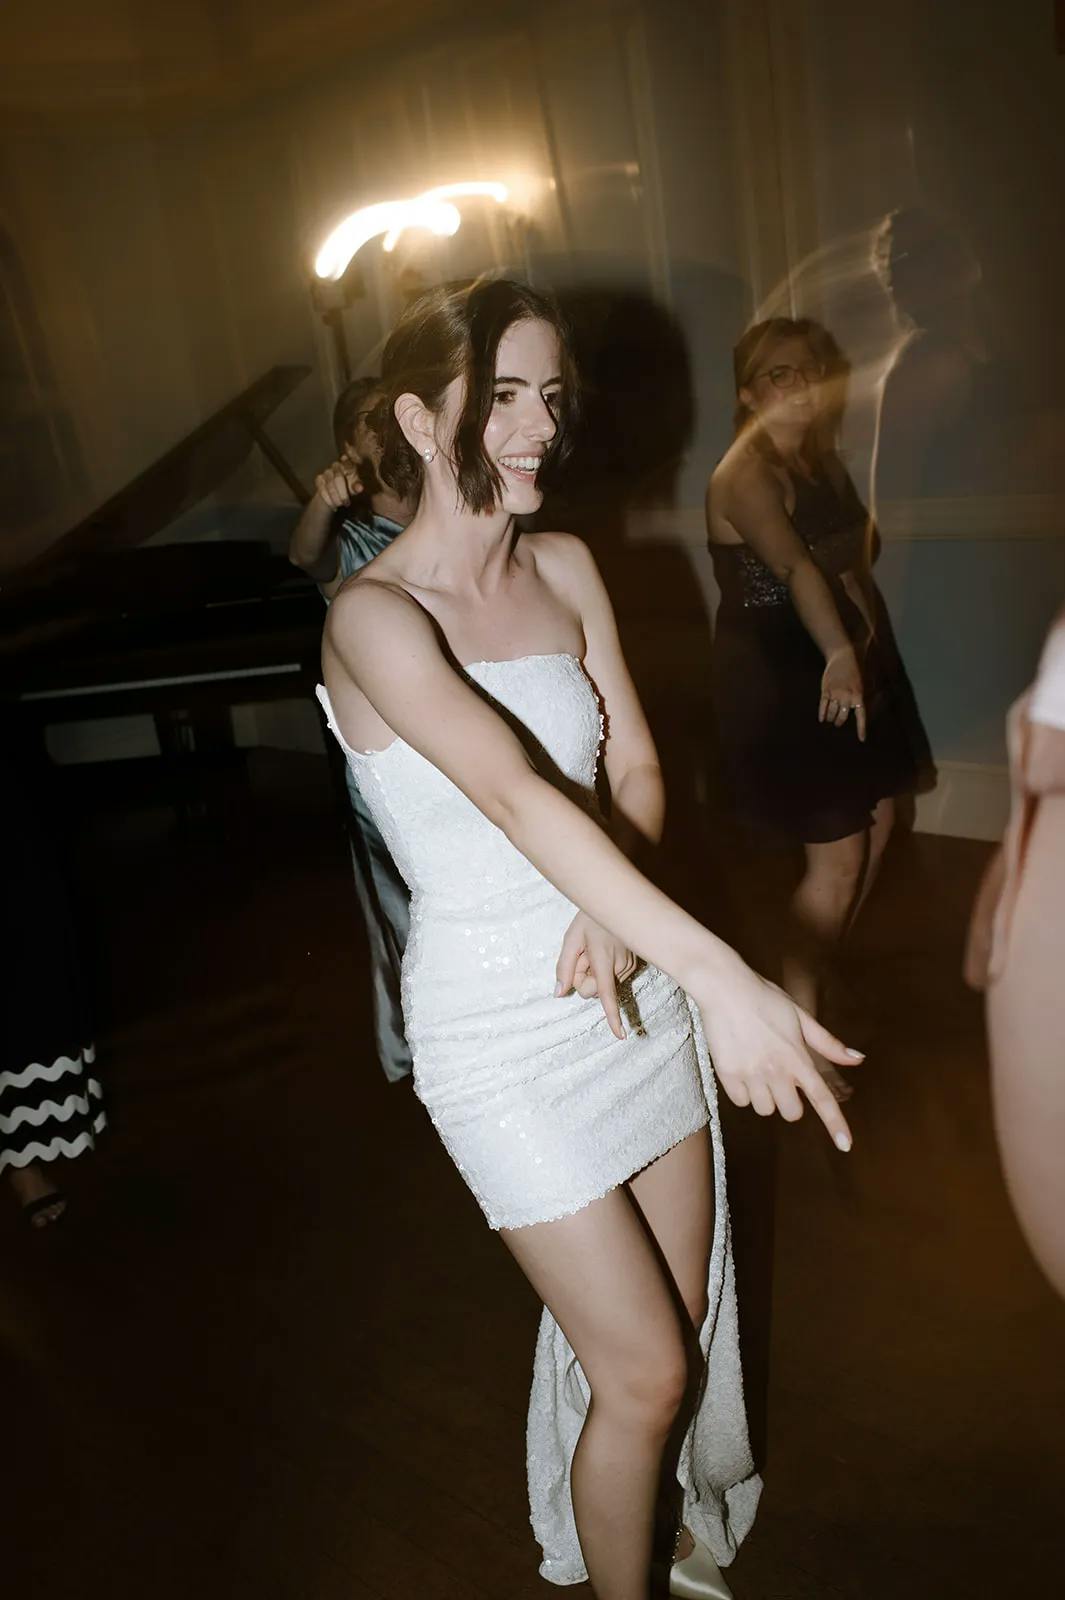 A woman in a white, sequined strapless dress dances joyfully at an indoor event. She is smiling widely and seemingly in motion with one arm extended. Some blurred people are in the background, suggesting movement and lively activity.